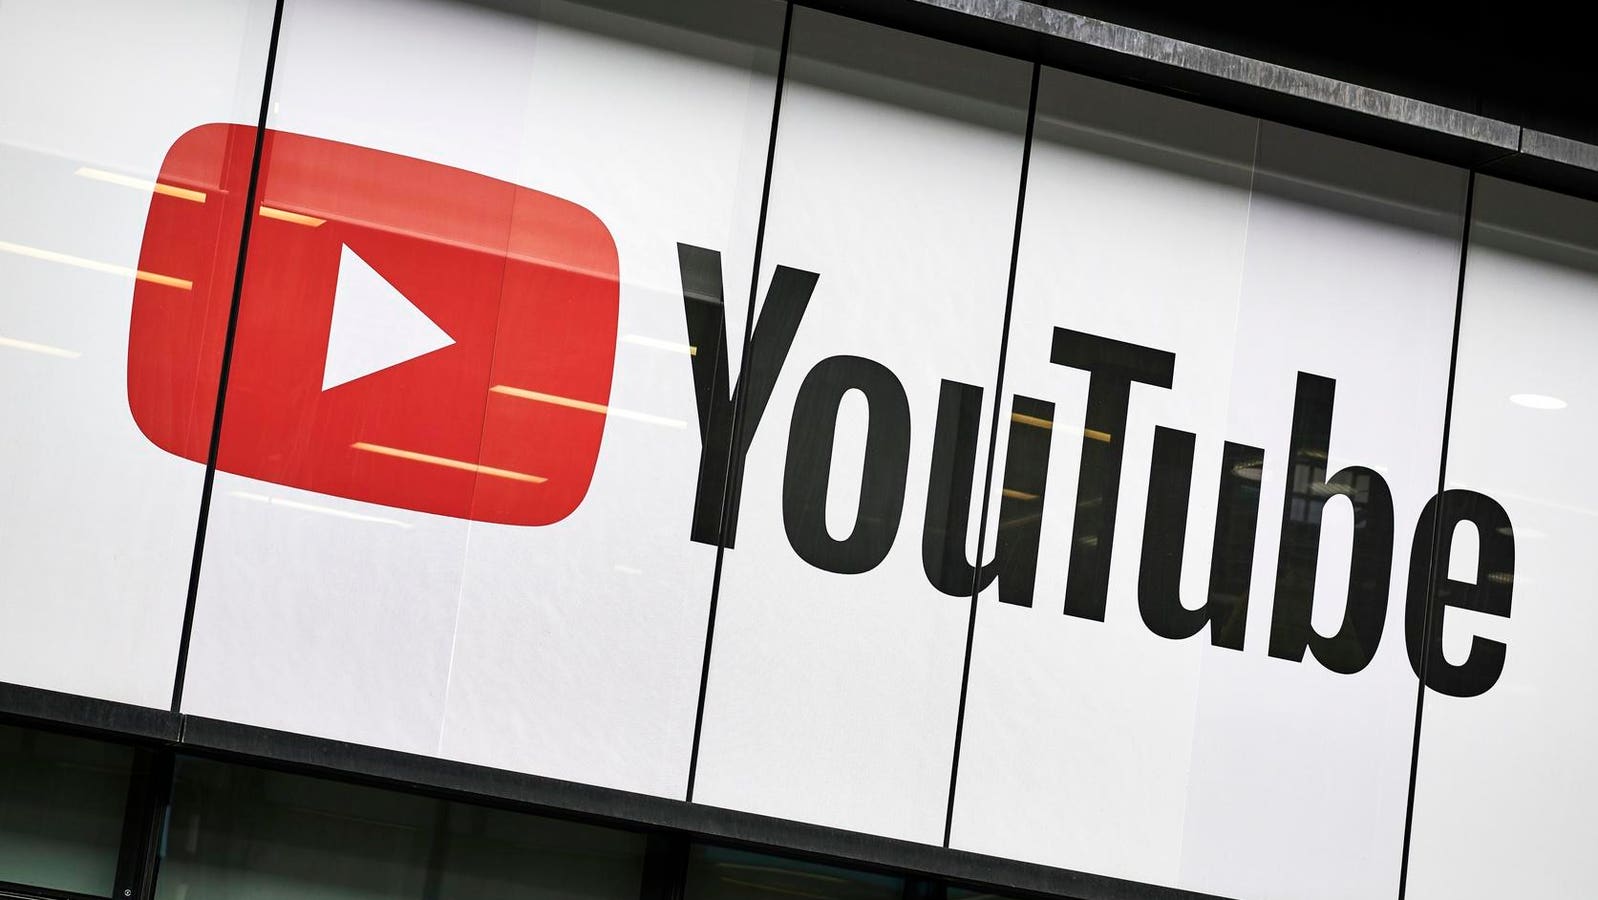 YouTube announces limits on videos recommended for teens experiencing mental health crisis